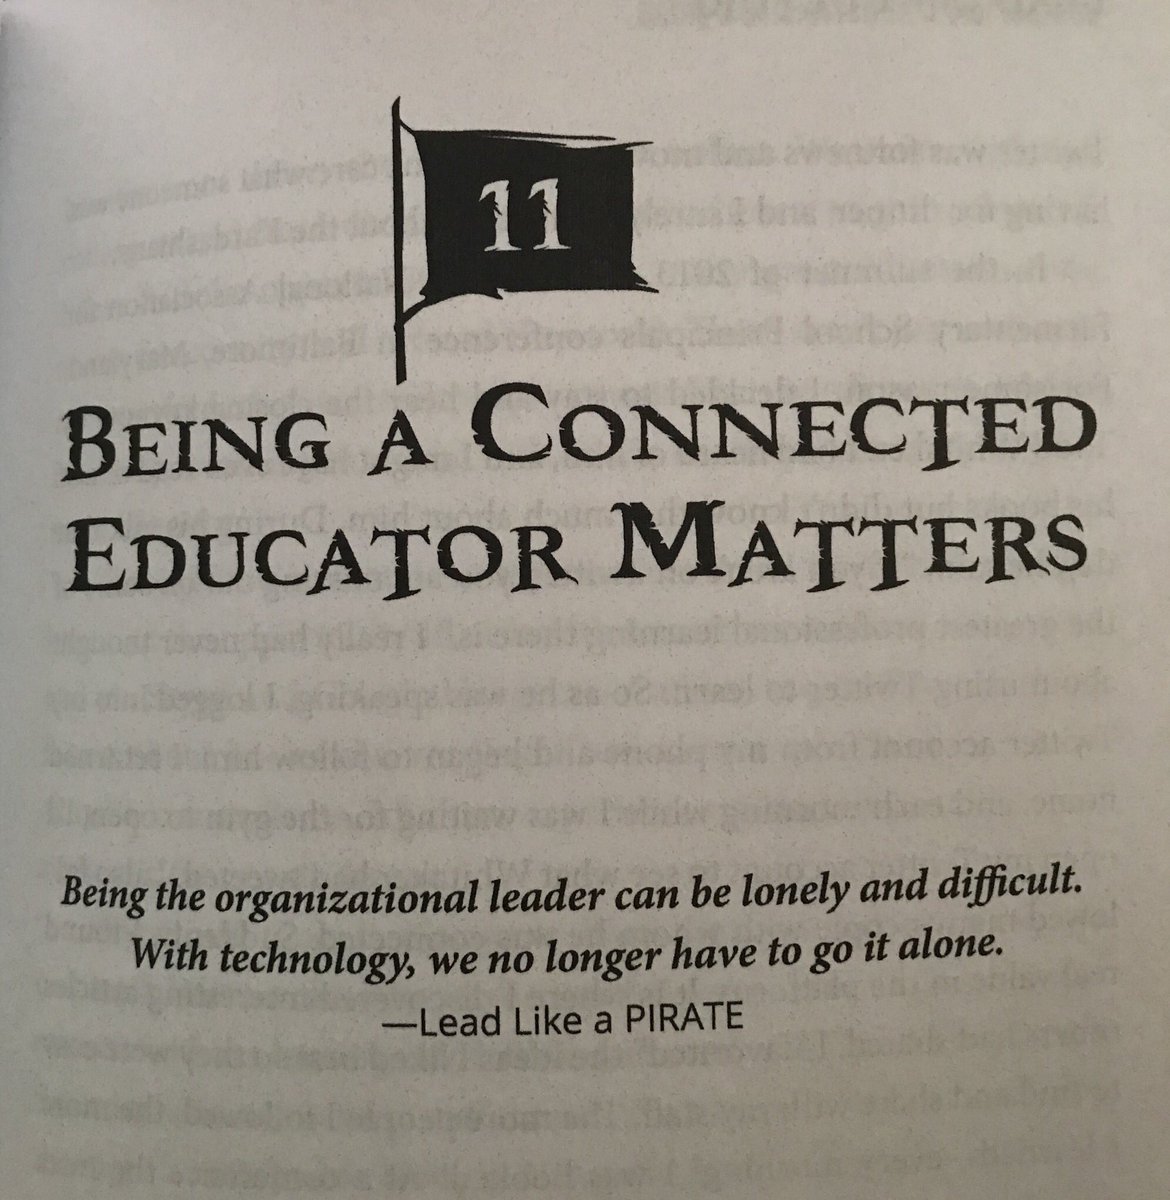 “Having a connected culture in your school matters. It opens your school and your teachers to a world outside your district. It gives you people with whom you can share ideas.” #LeadLAP #LeadWithCulture